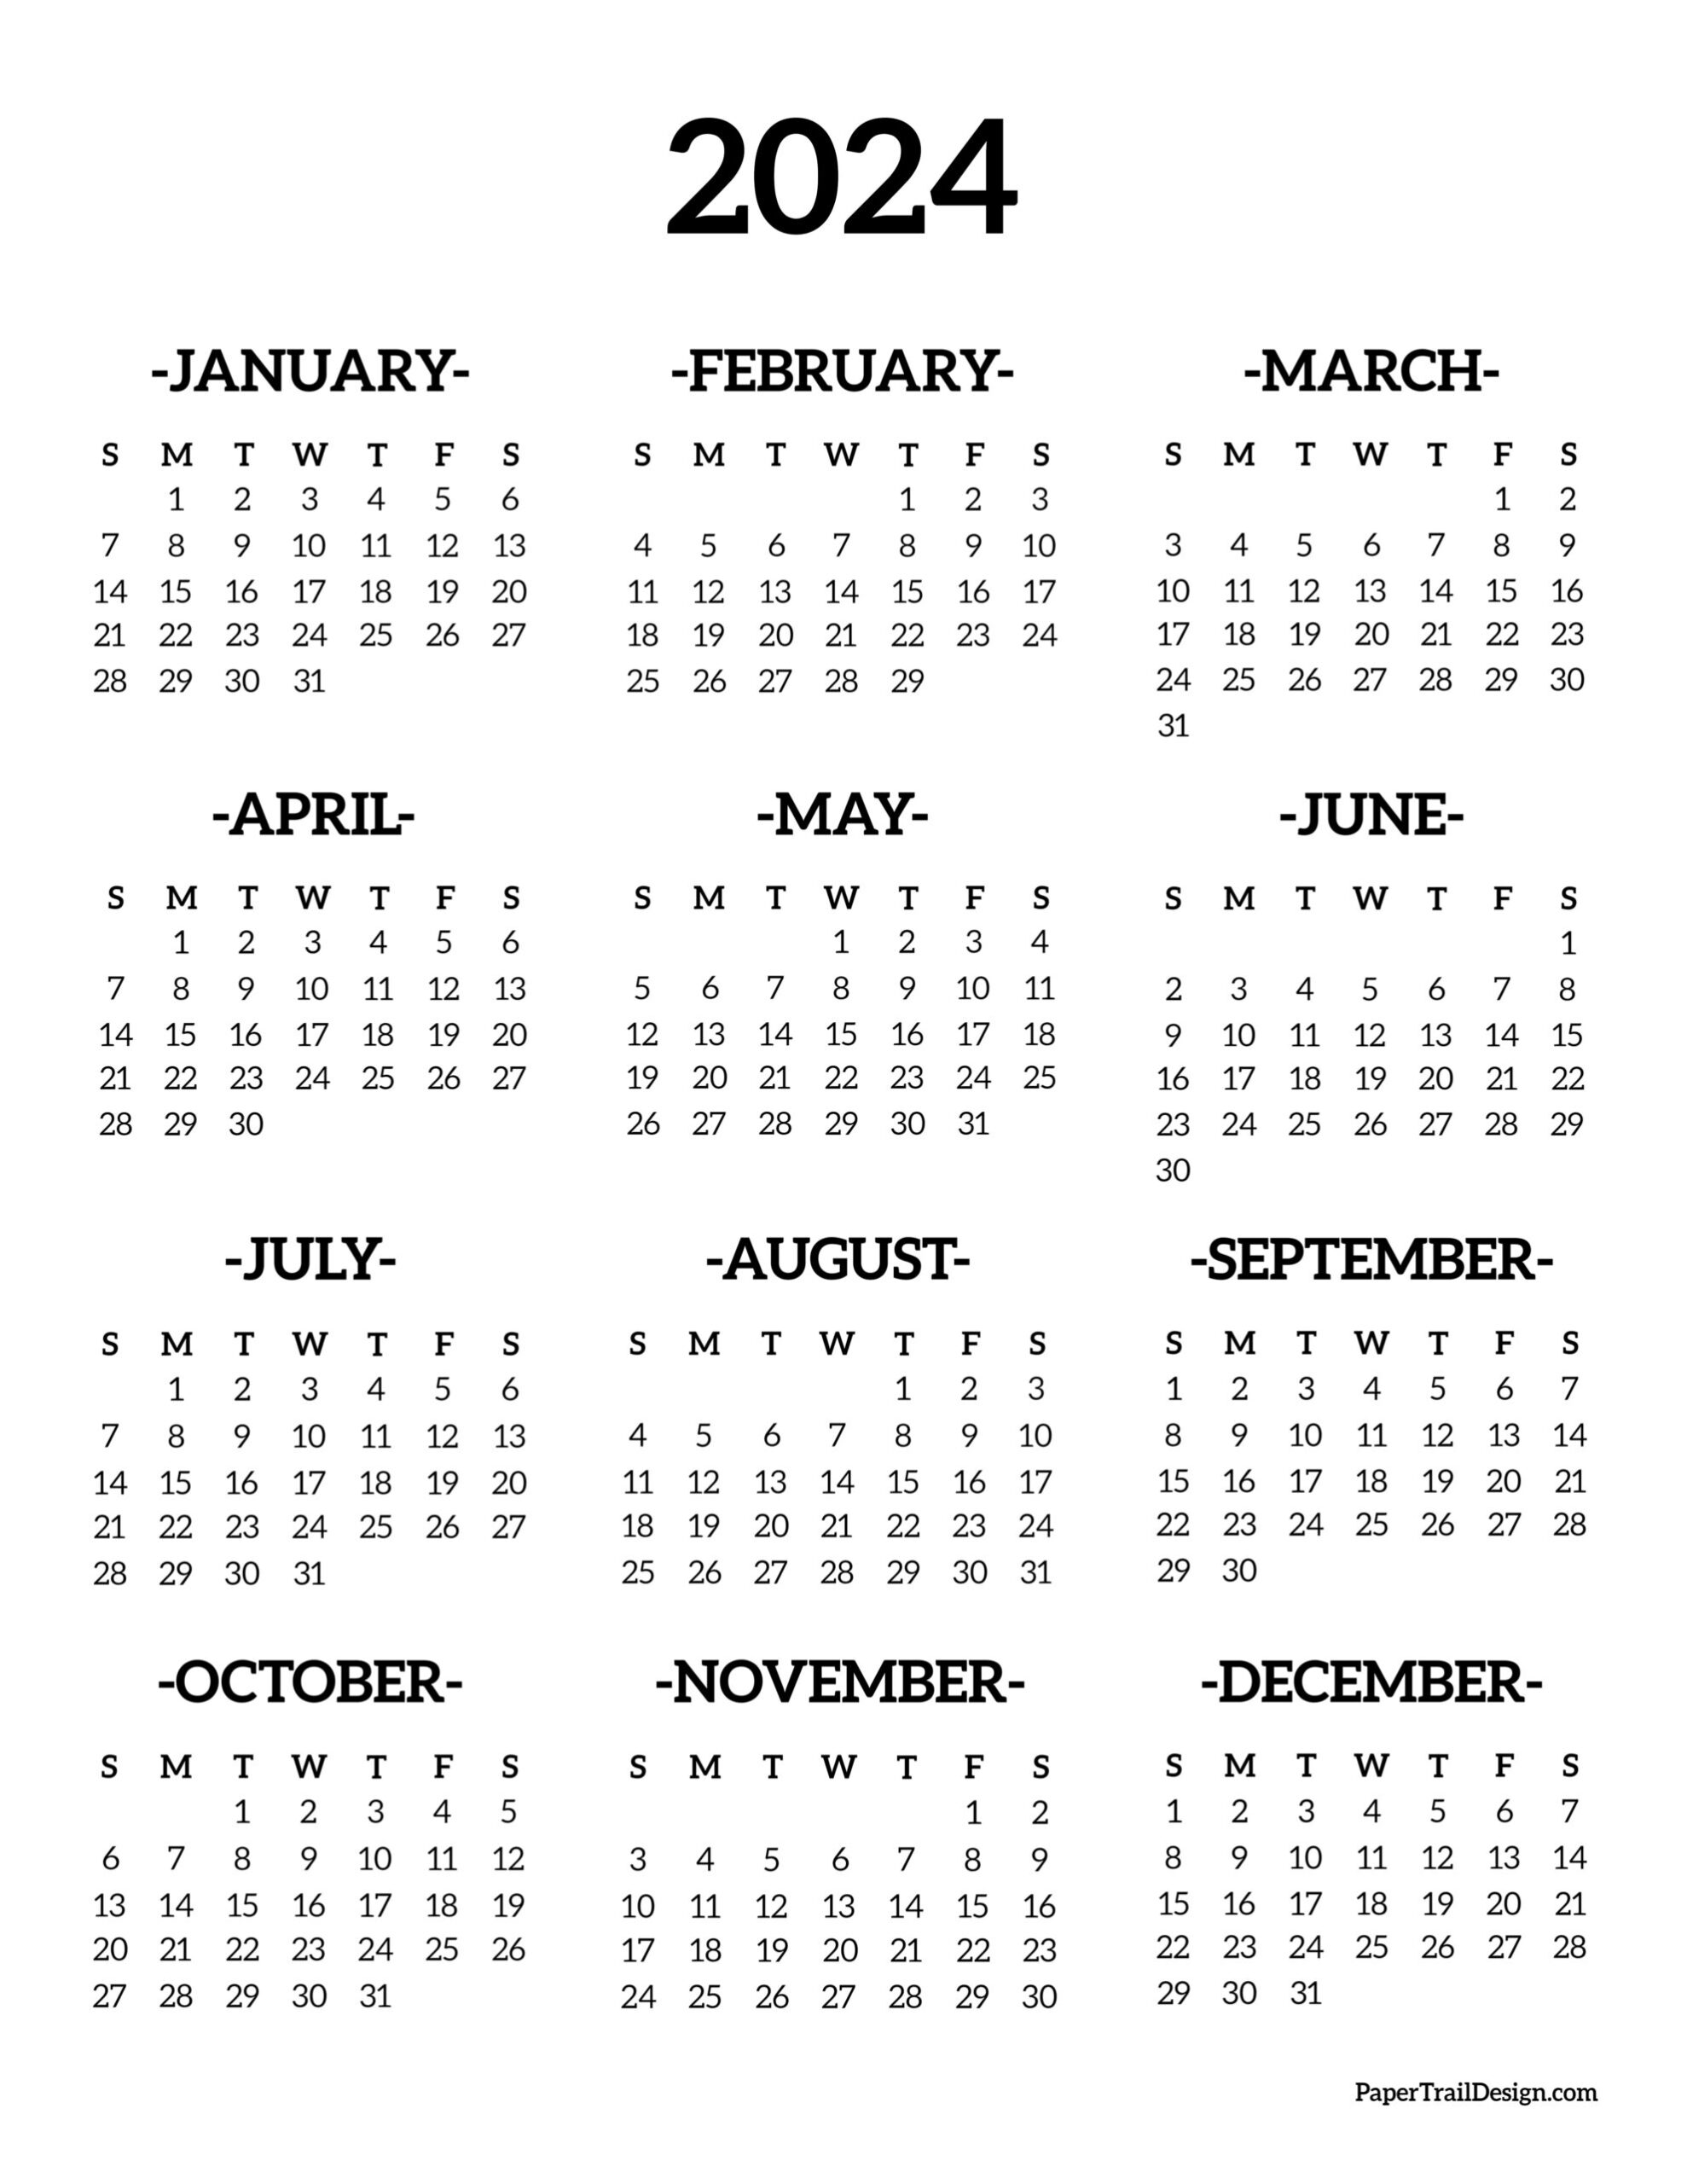 Calendar 2024 Printable One Page - Paper Trail Design for Printable Free Yearly Calendar 2024